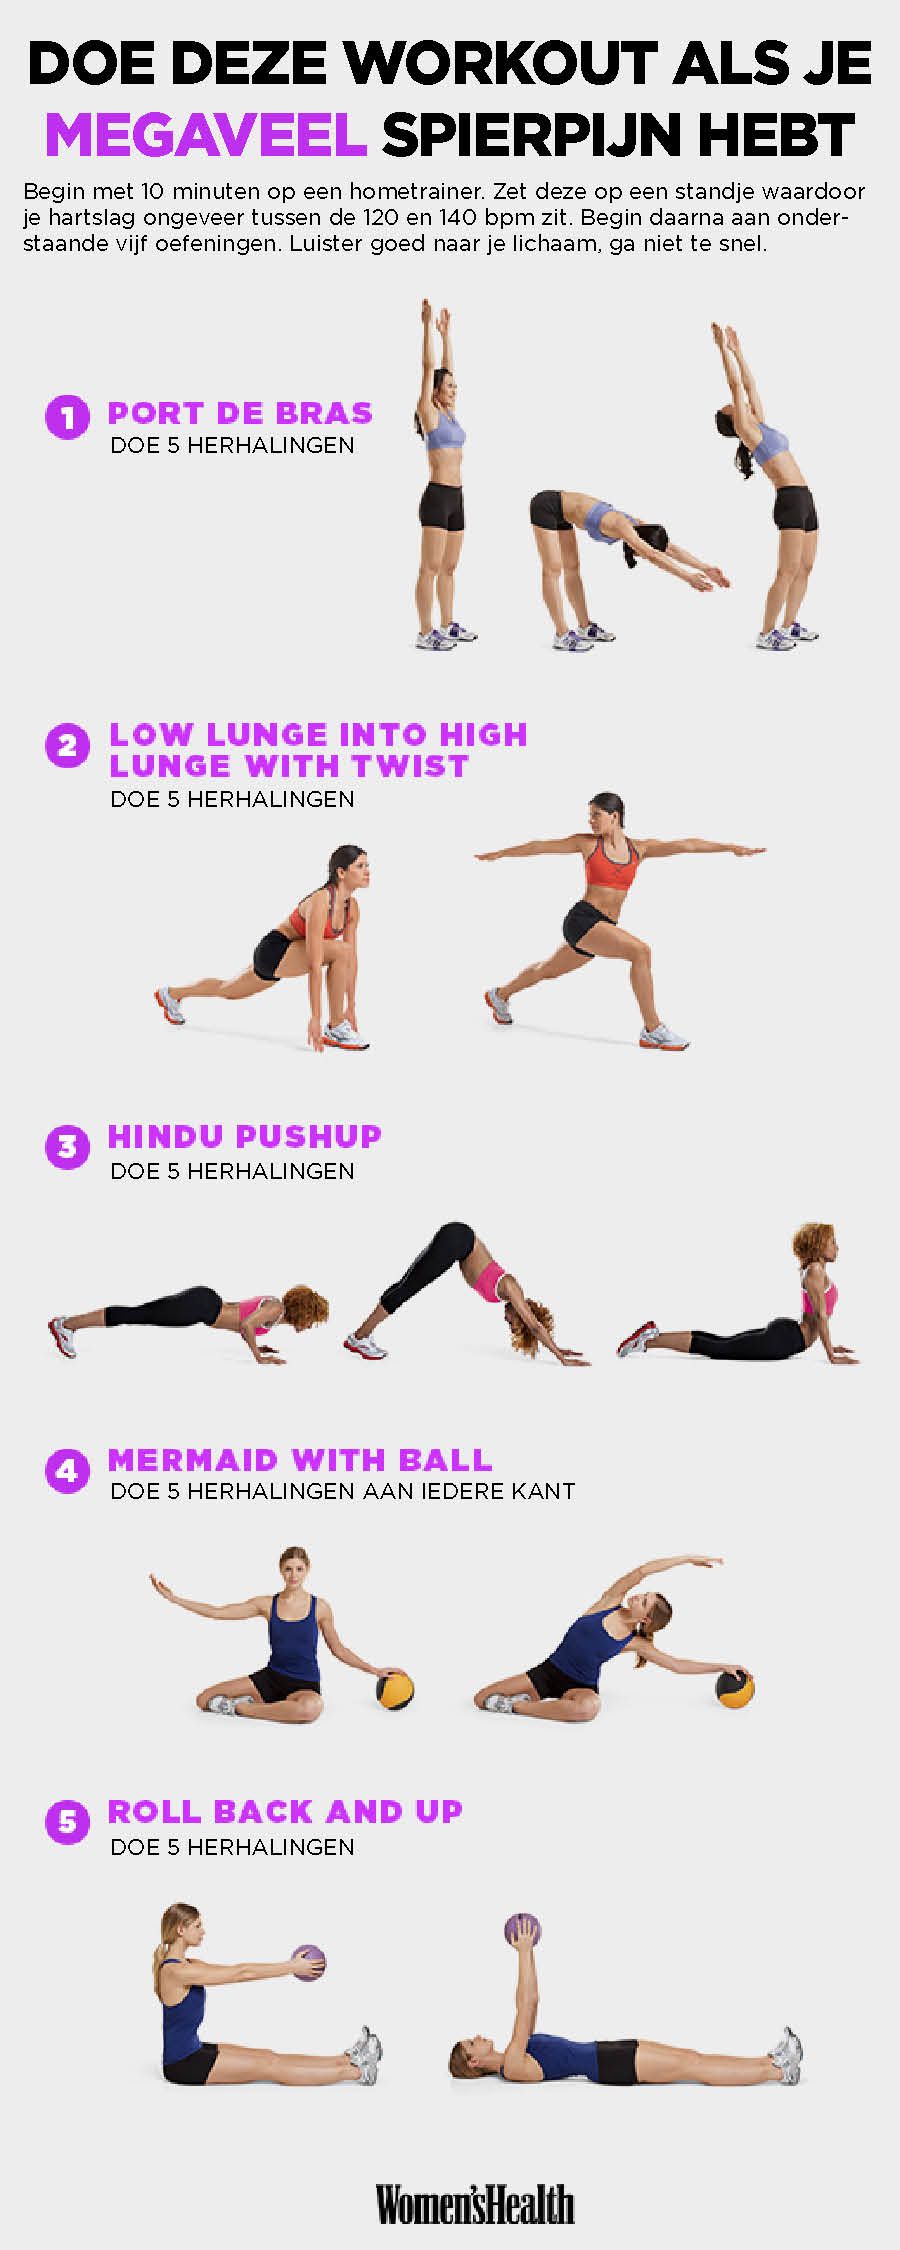 Shoulder, Leg, Physical fitness, Joint, Arm, Pilates, Stretching, Aerobics, Exercise, Circuit training, 